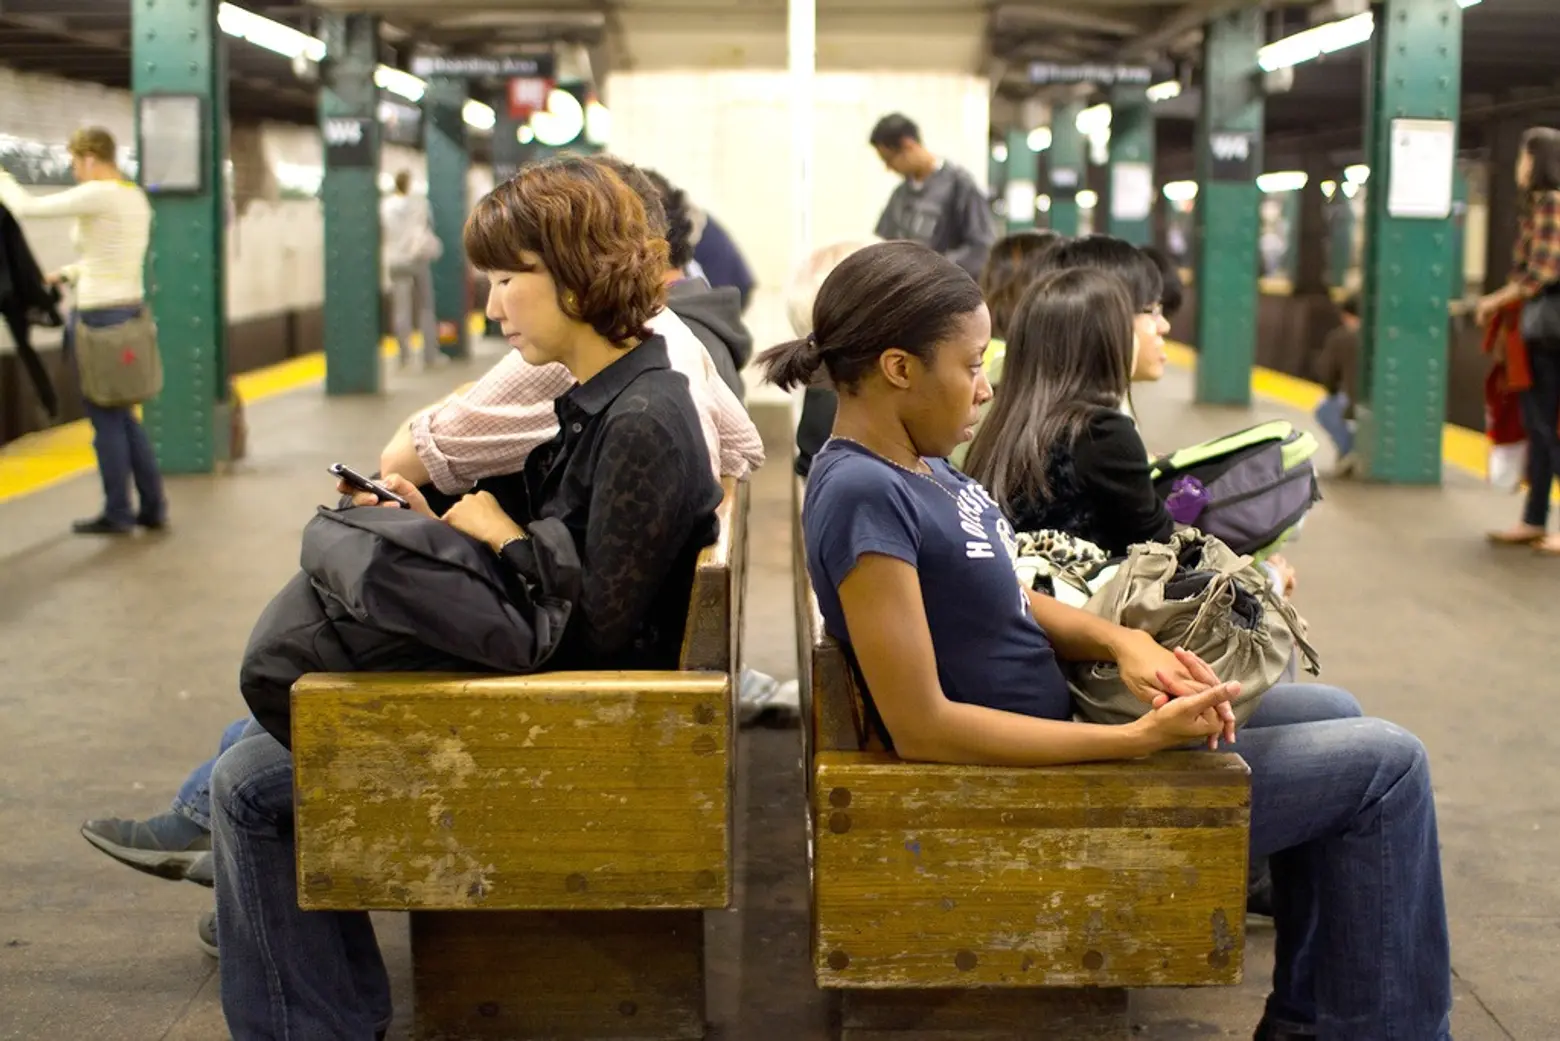 How Long Should You Wait For the Subway Before Giving Up?